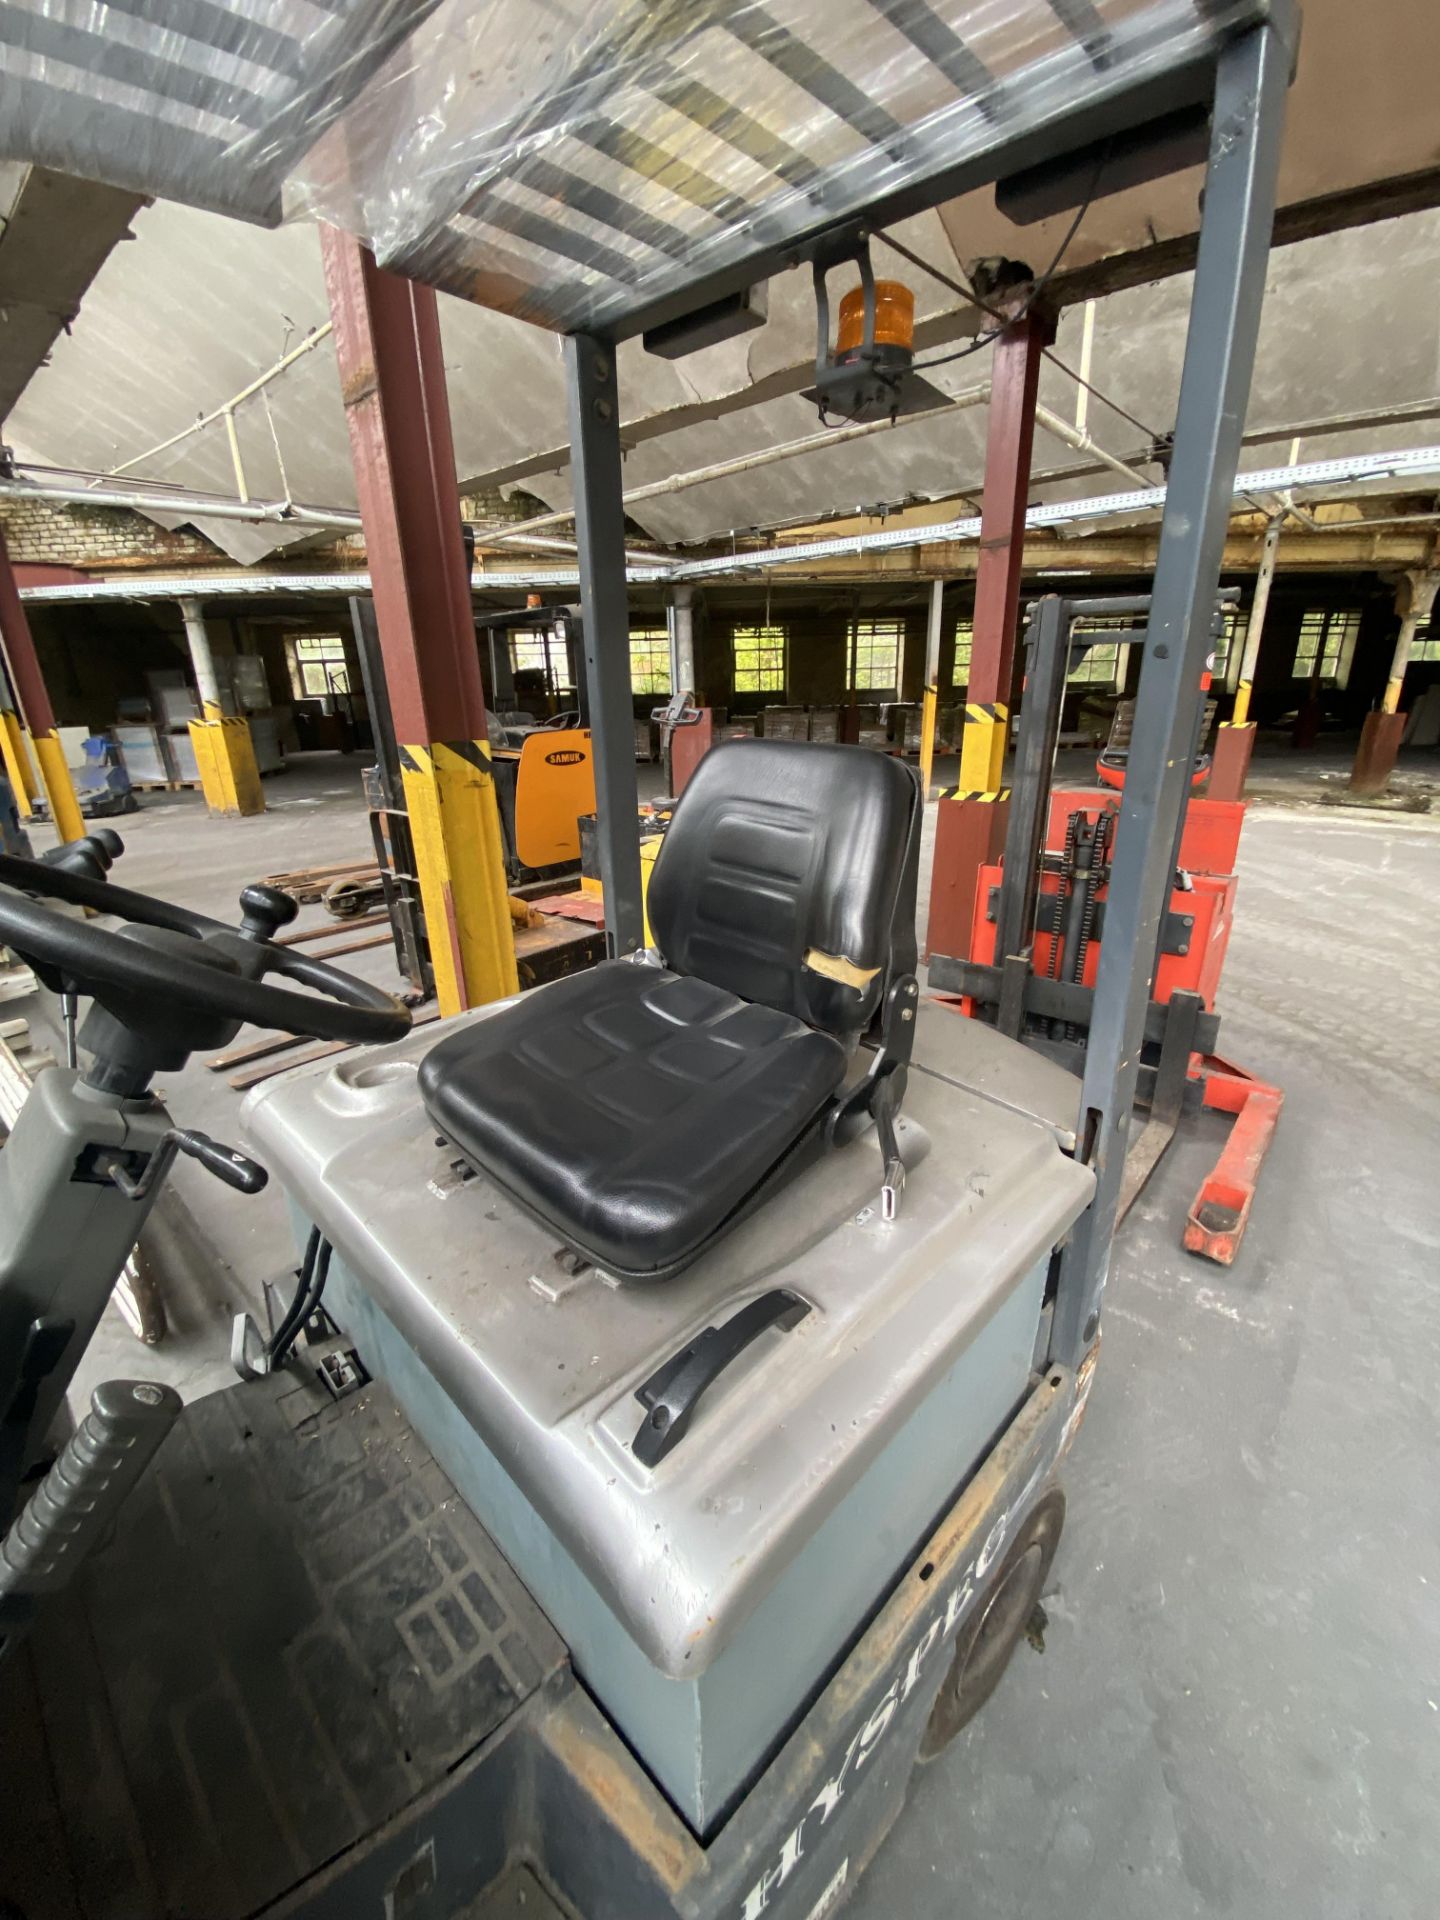 Hypsec HE4-15 1200kg cap. Electric Fork Lift Truck, serial no. 08081925, hours unknown, 4500mm - Image 7 of 8